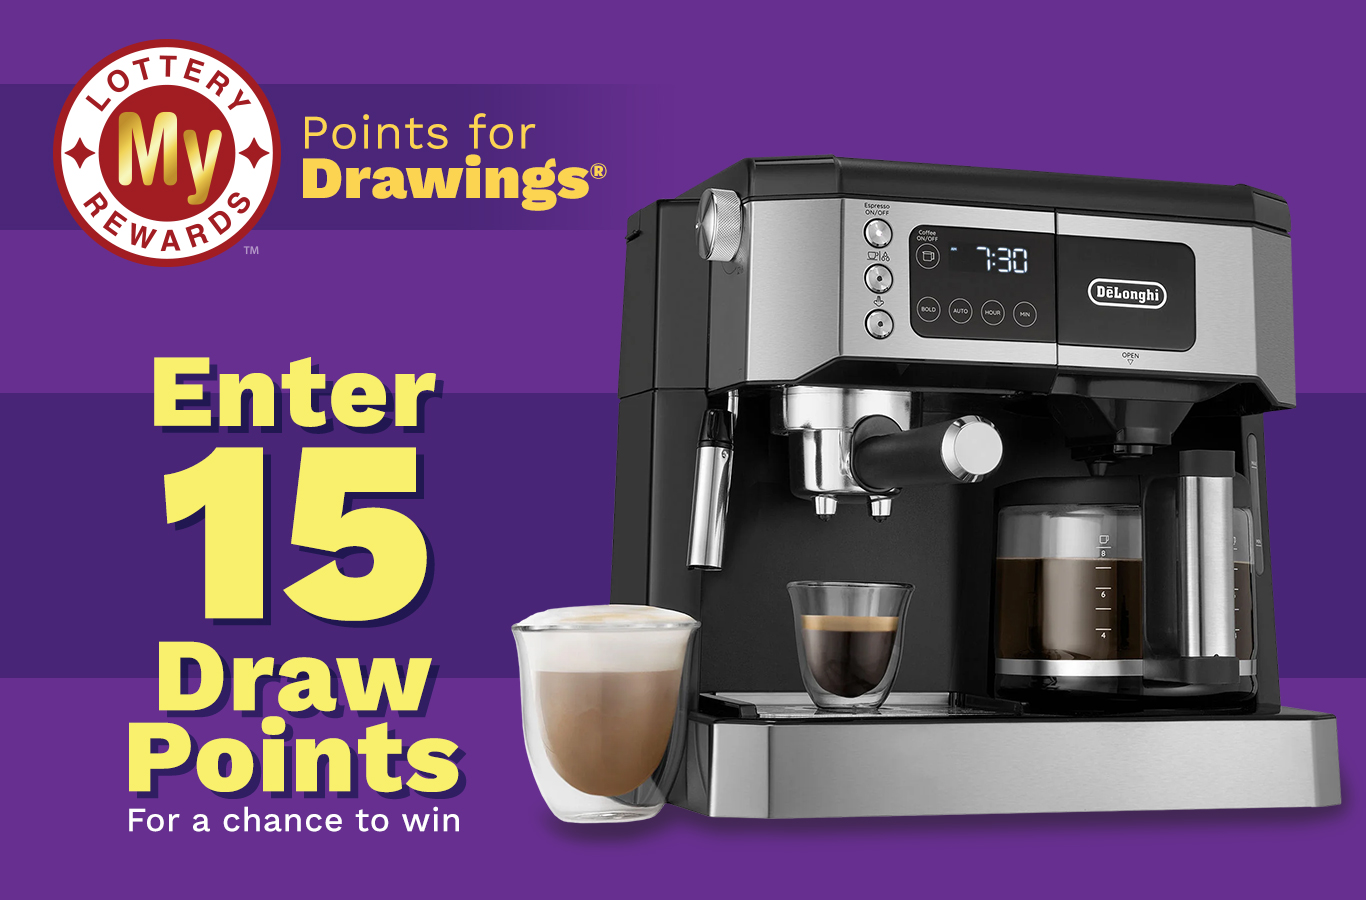 Here's your chance to win a Coffee and Espresso Maker! Enter by Tuesday, July 5th.